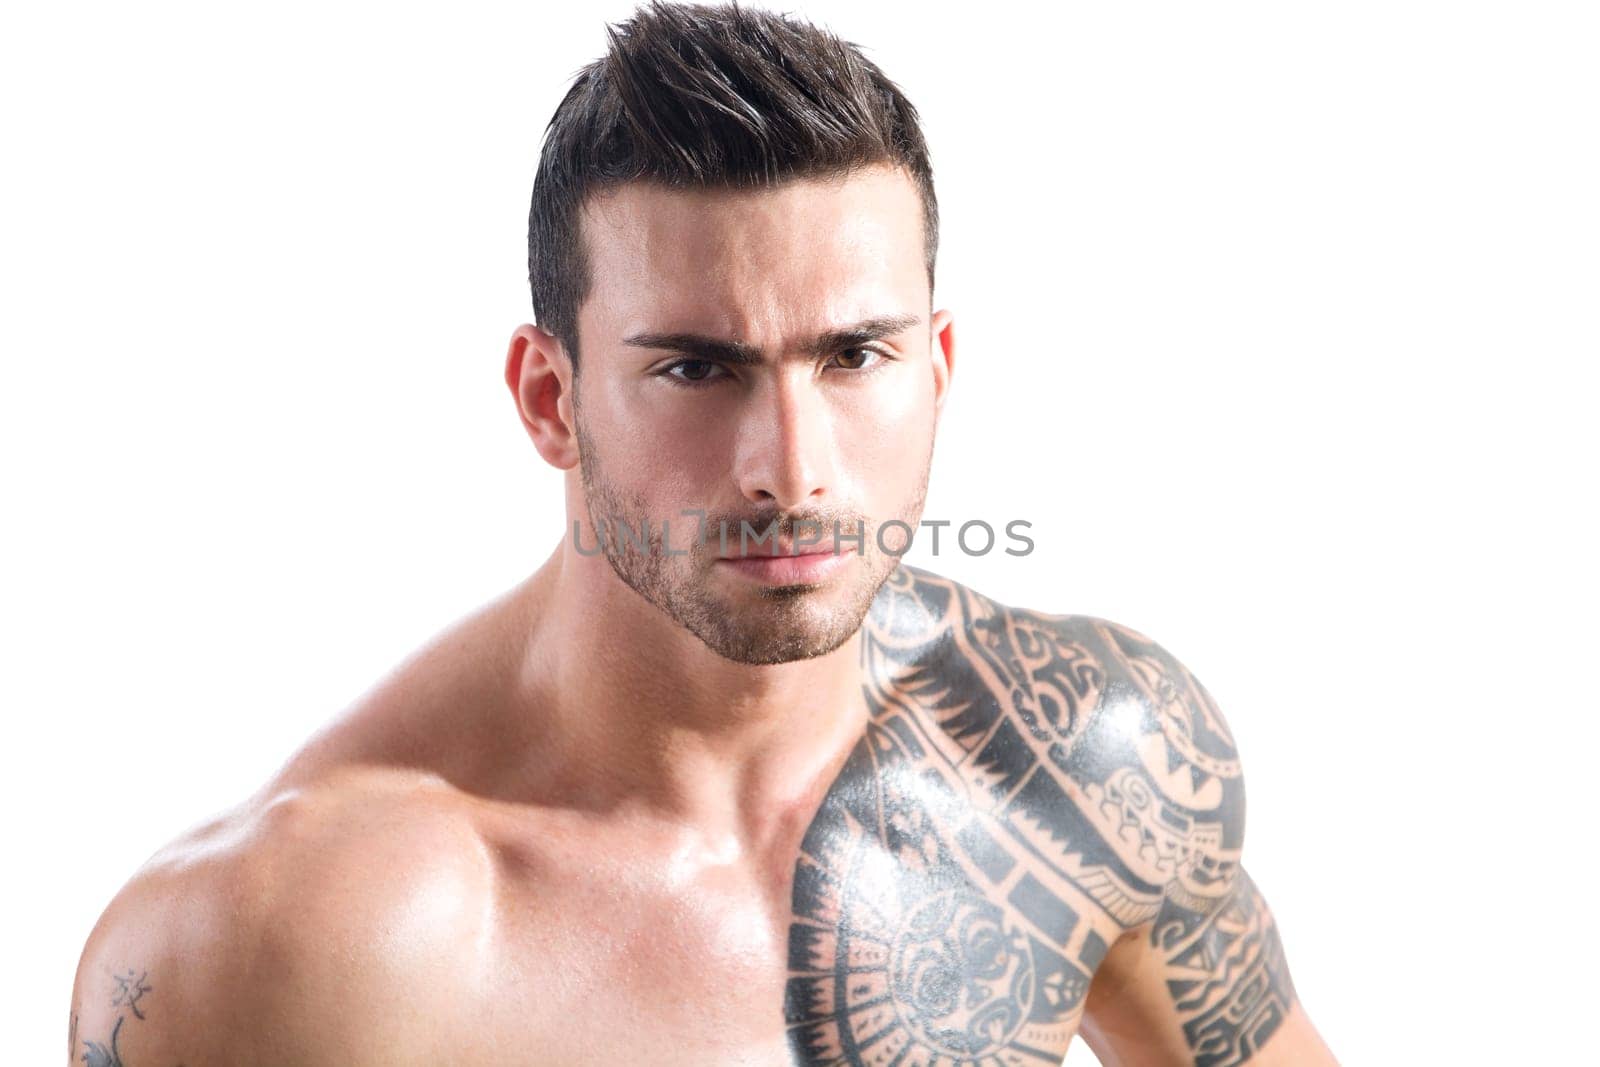 Photo of a muscular and handsome man showing off his arm tattoo by artofphoto